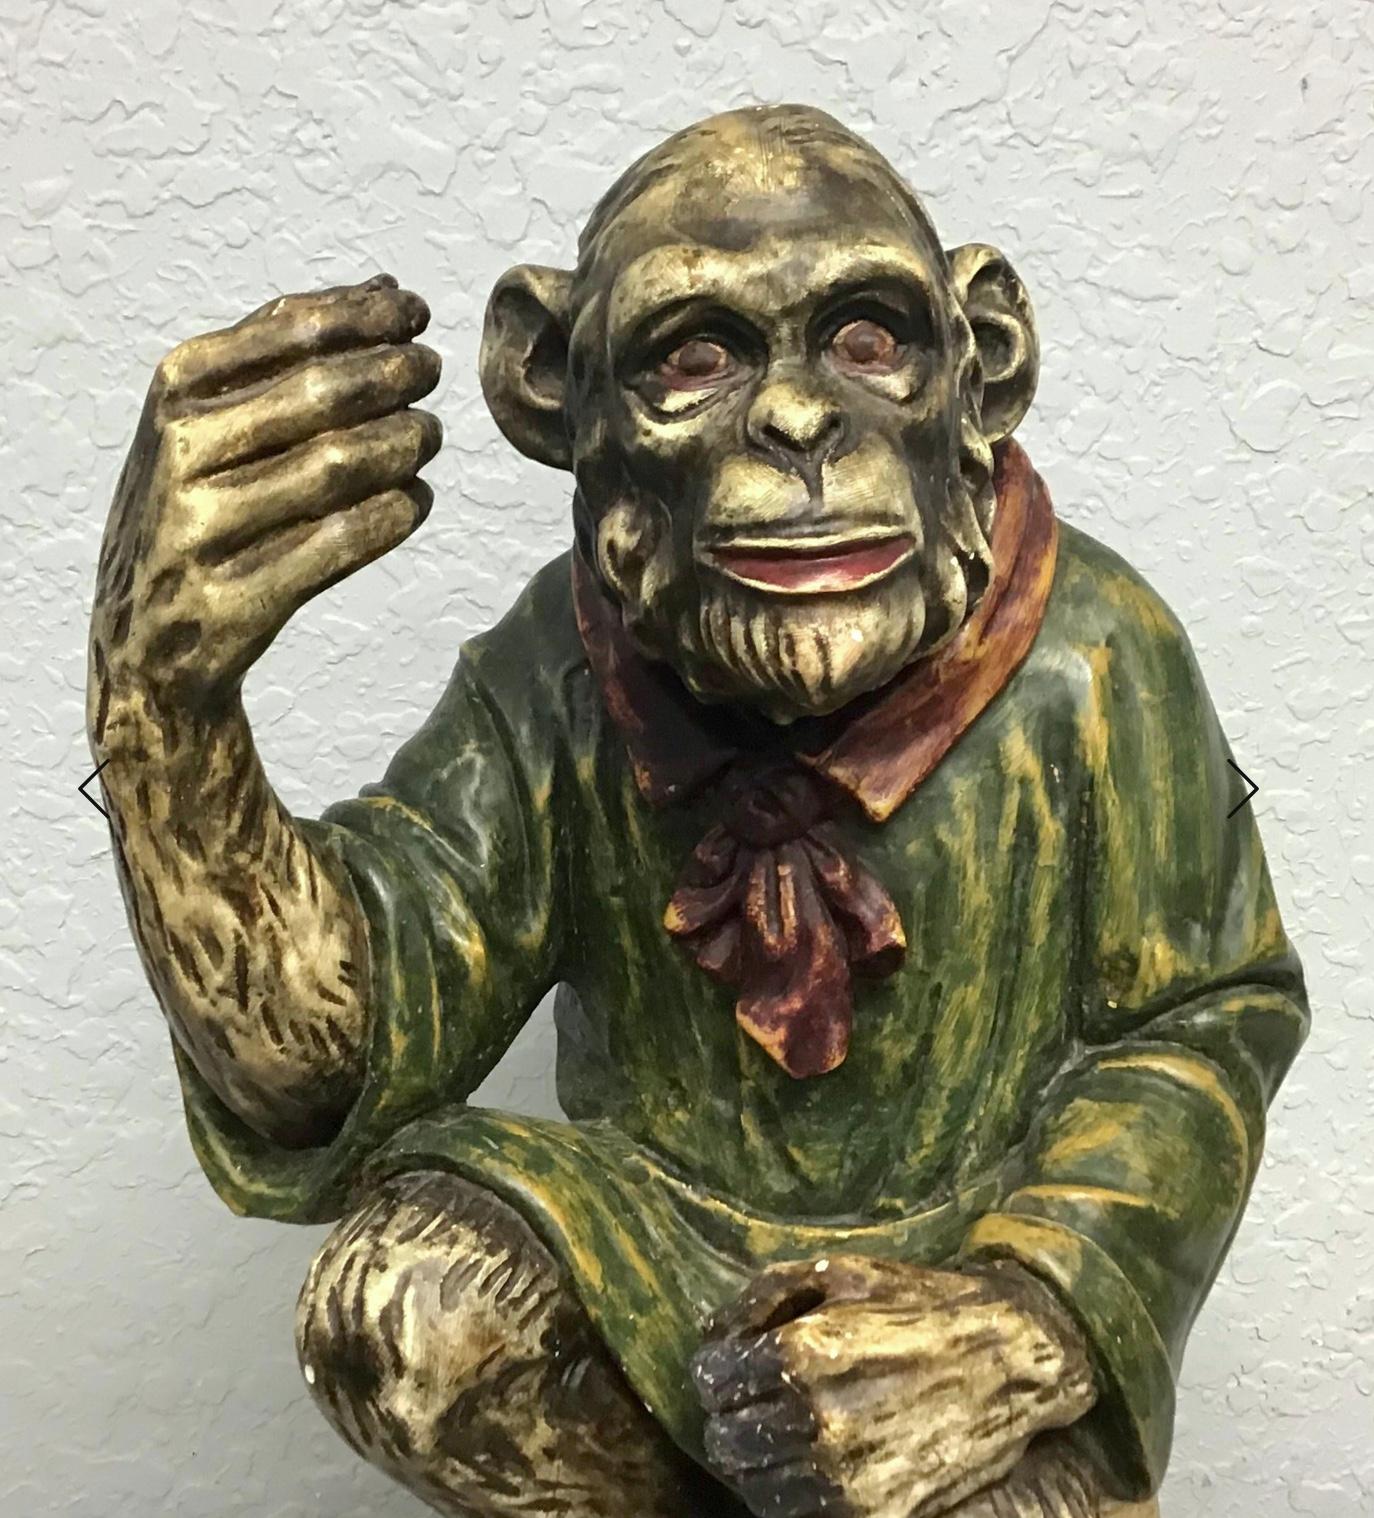 Vintage Italian Venetian hand carved wood sitting monkey. Very well carved and realistic look. Painted finish with monkey sitting on silver gilt rock base. Wonderful old worn patina to the original painted finish. Great decorative one of a kind